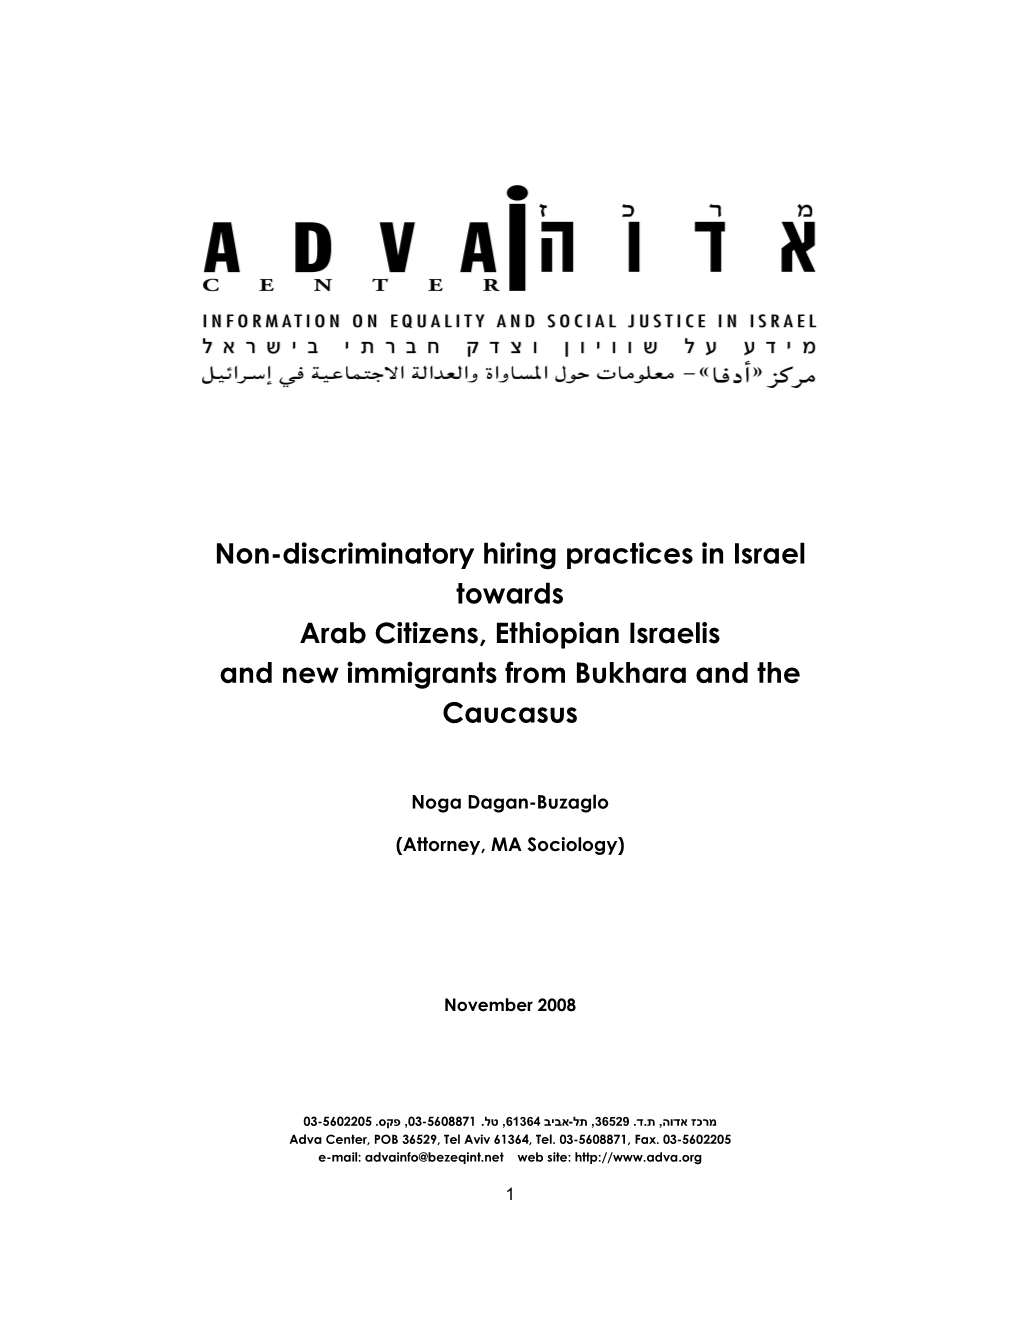 Non-Discriminatory Hiring Practices in Israel Towards Arab Citizens, Ethiopian Israelis and New Immigrants from Bukhara and the Caucasus